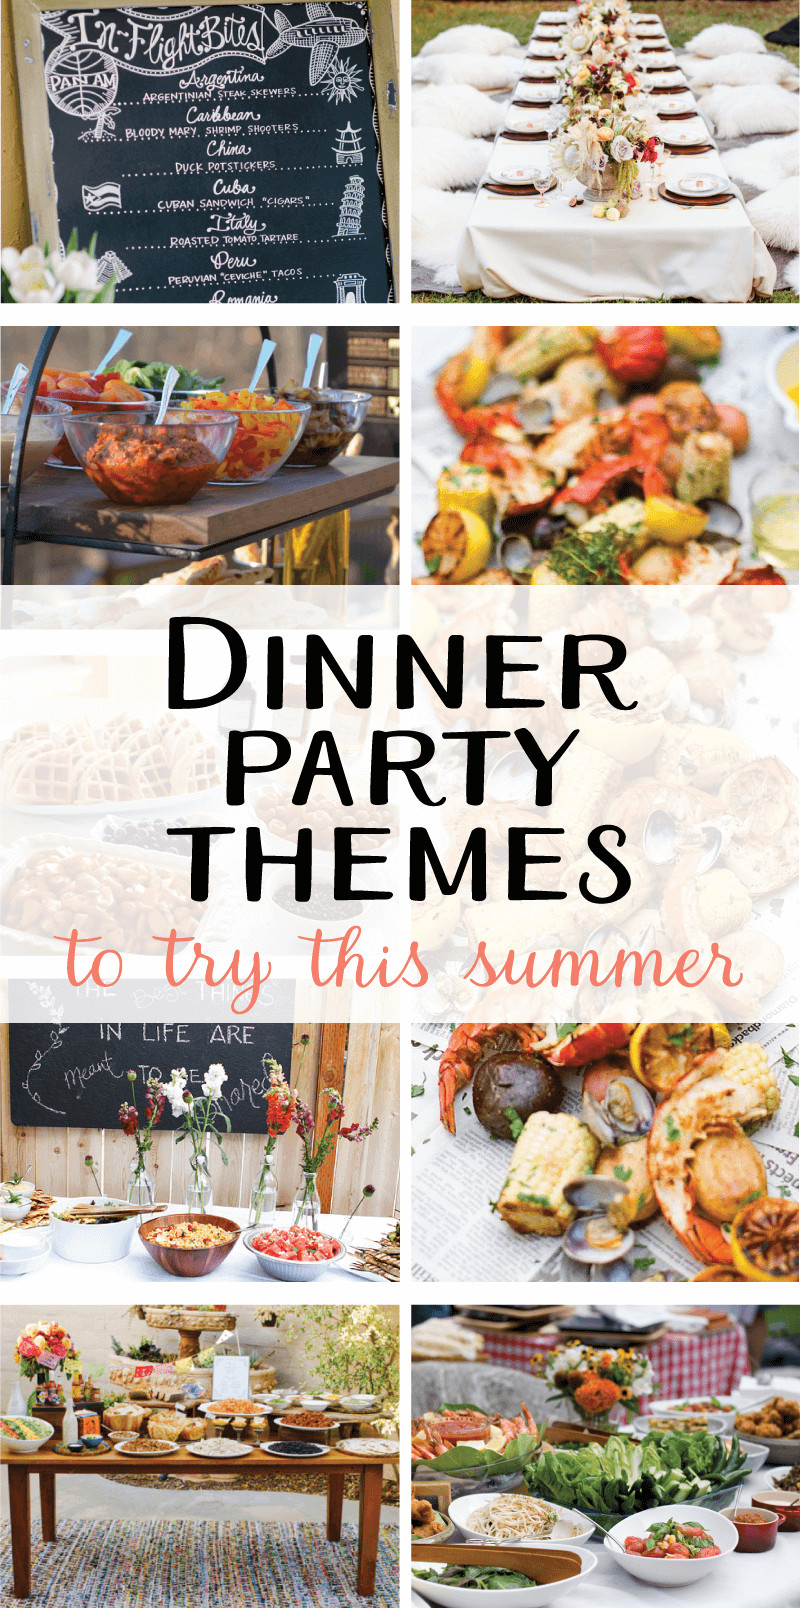 Summer Party Dinner Menu Ideas
 9 Creative Dinner Party Themes to Try this Summer on